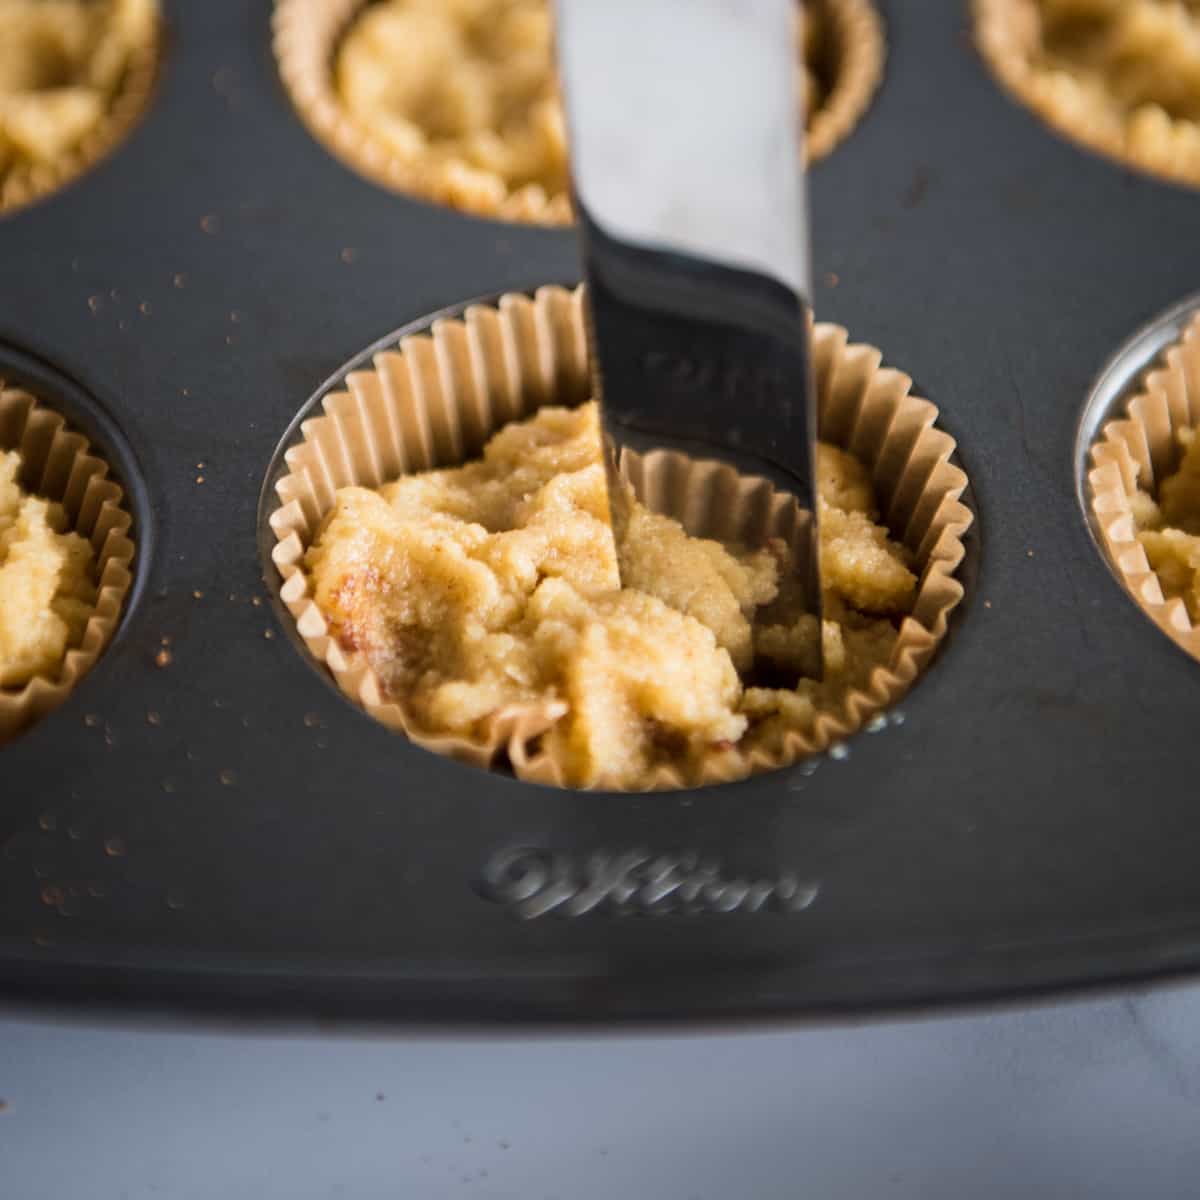 butter knife inserted into muffin tin swirling batter and cinnamon sugar together